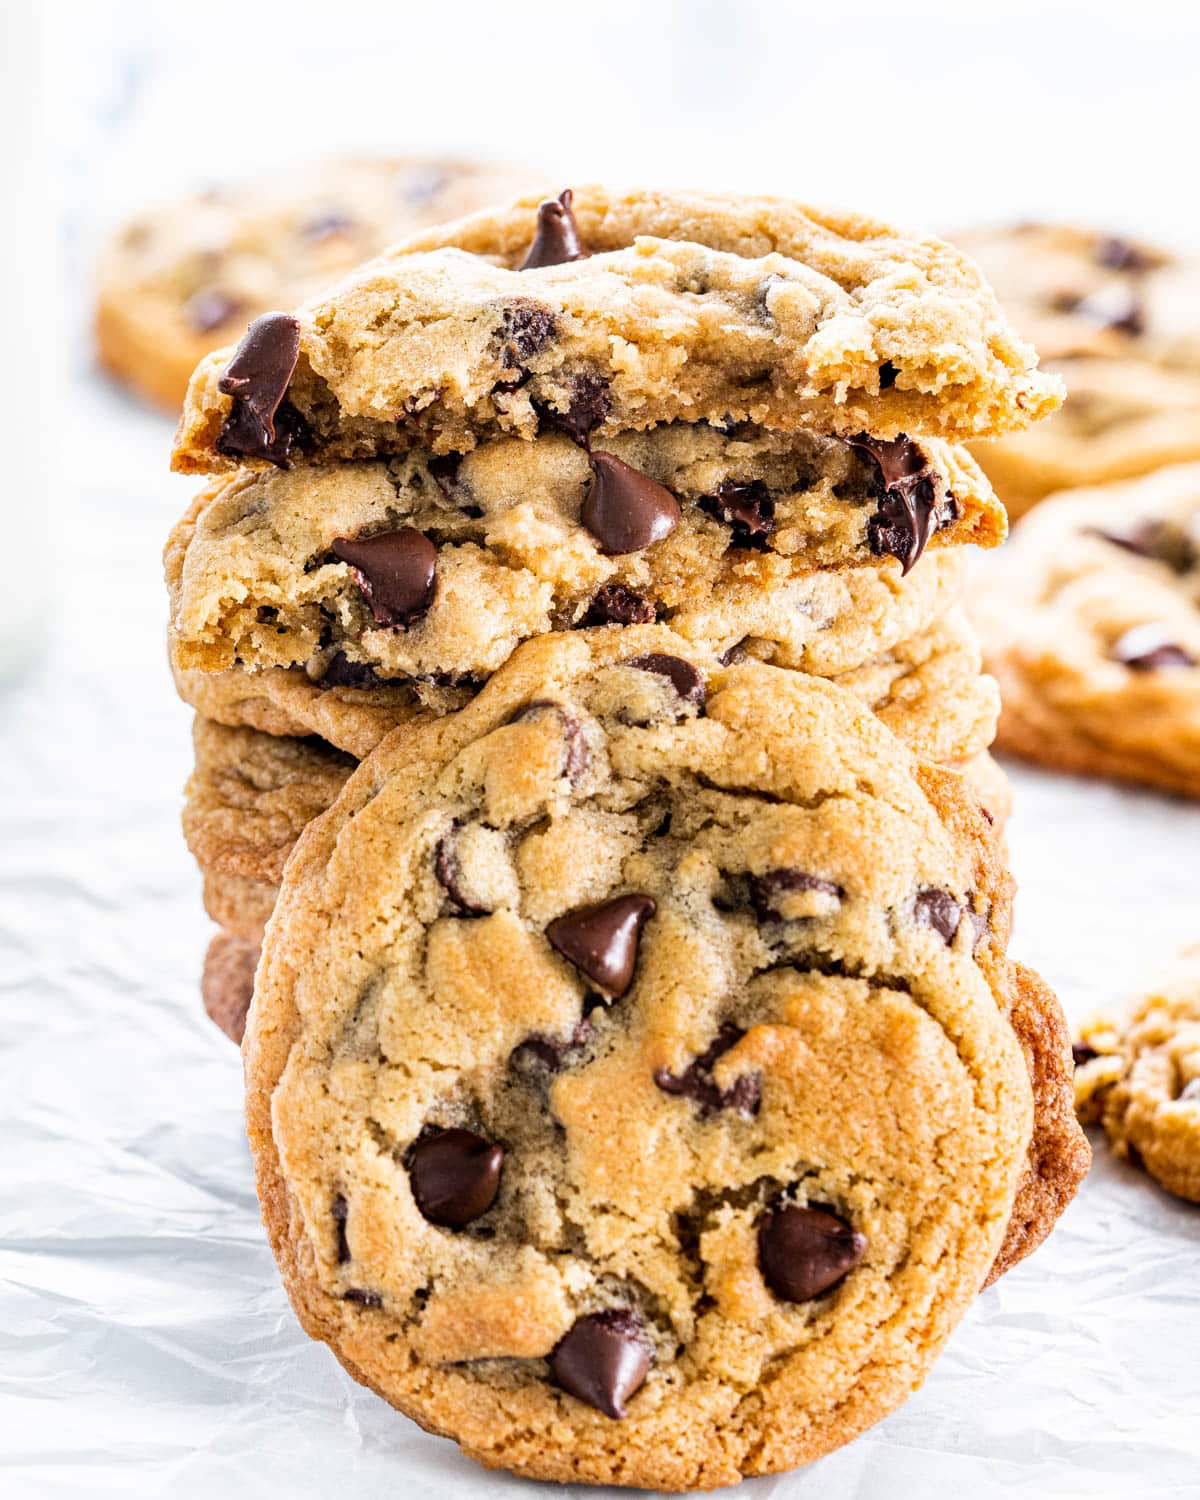 Chocolate Chip Cookies - Craving Home Cooked